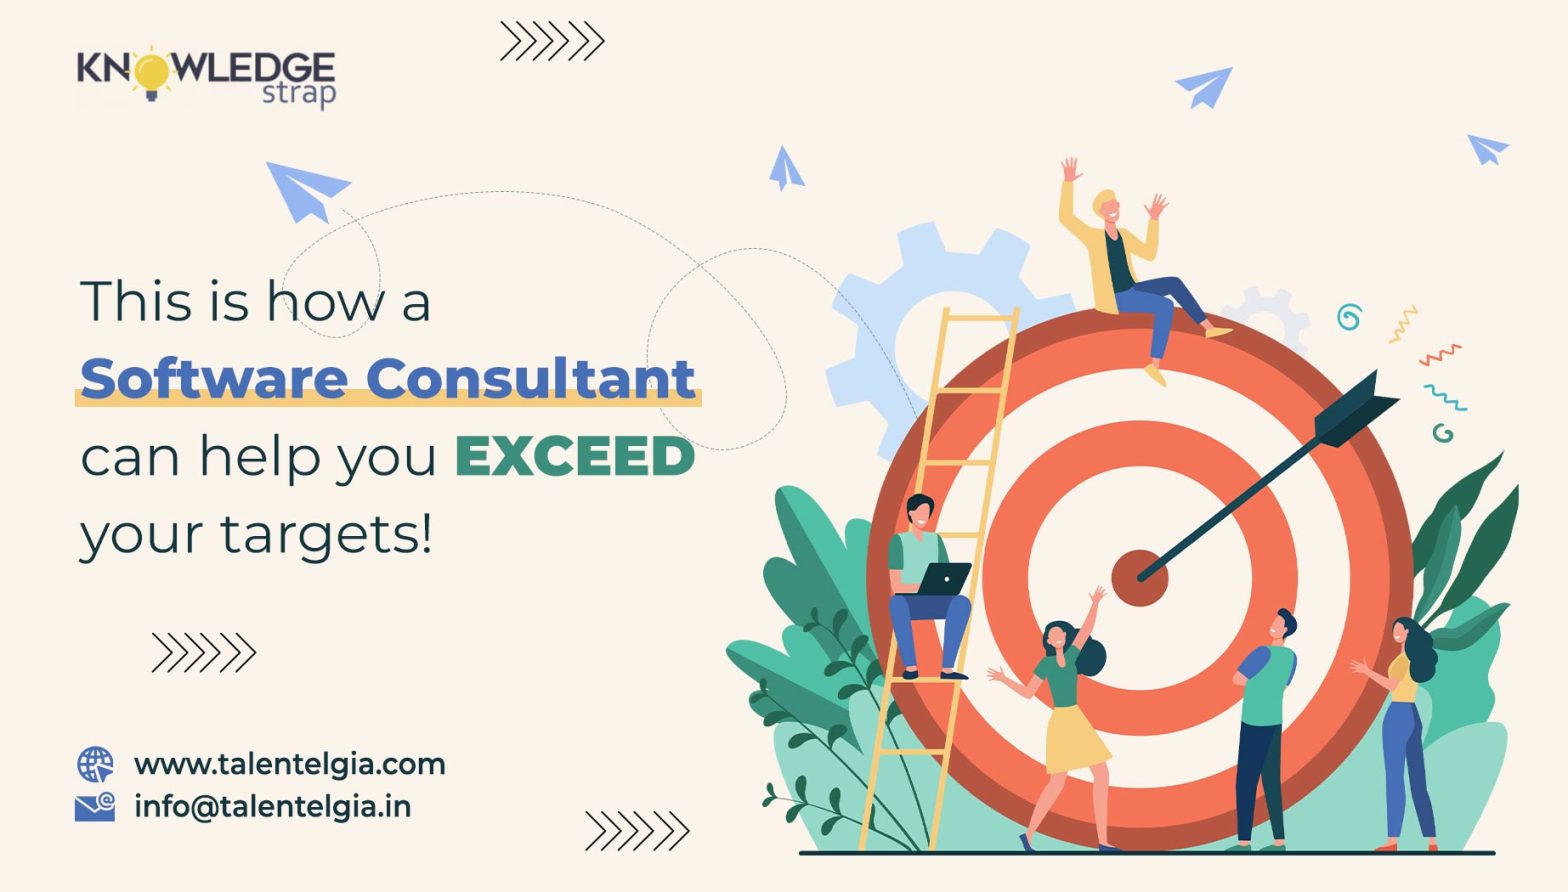 This is how a software consultant can help you EXCEED your targets!